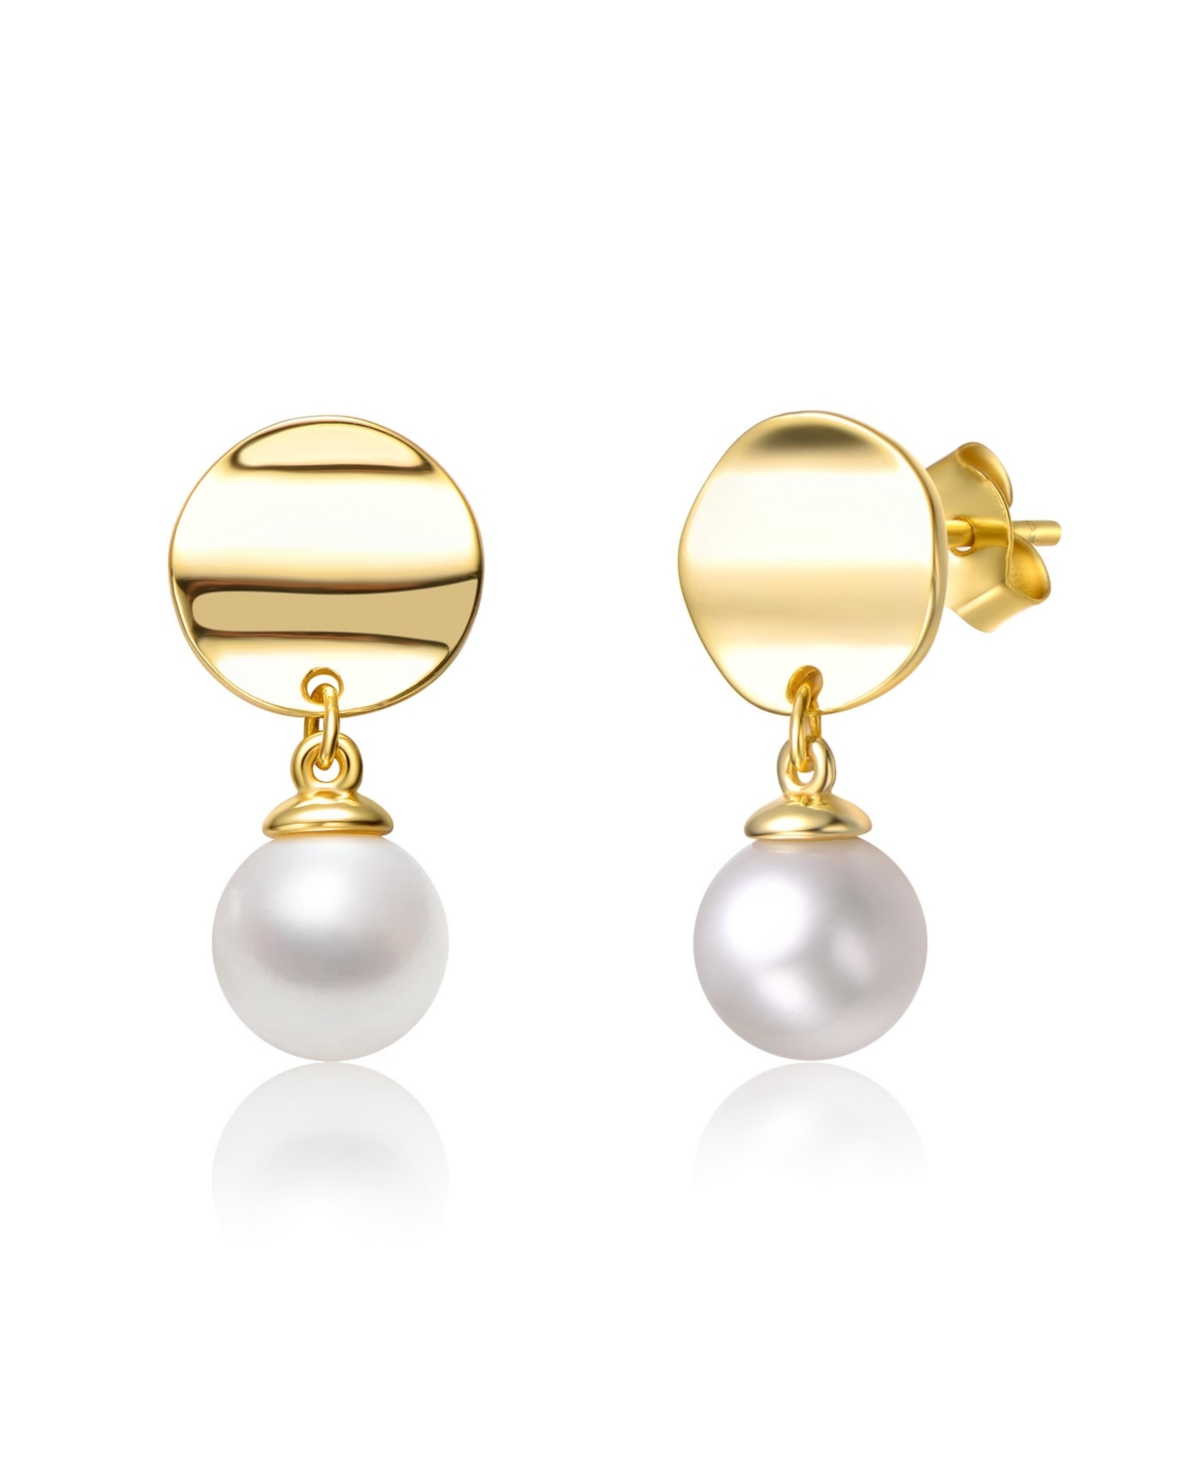 GENEVIVE STERLING SILVER & 14K GOLD-PLATED WHITE FRESHWATER PEARL DOUBLE DROP EARRINGS WITH GOLD MEDALLION CO